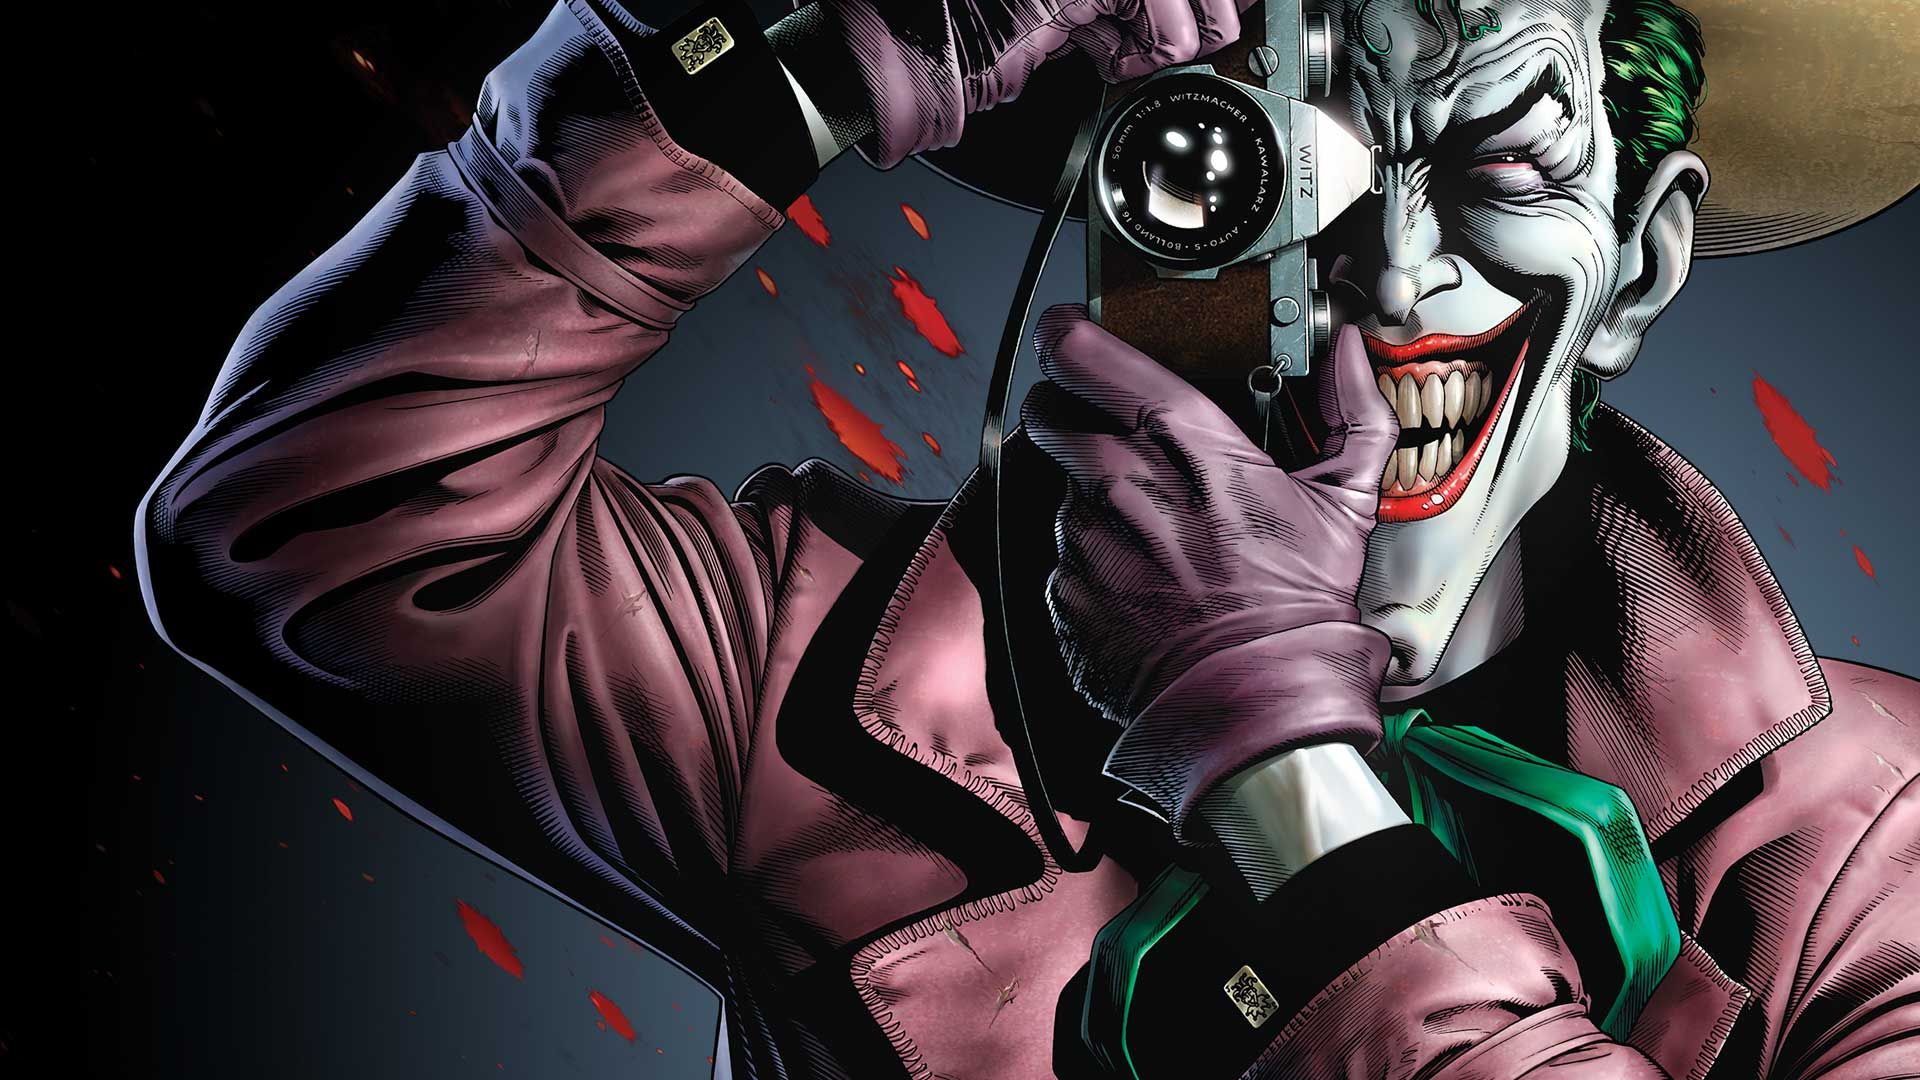 Joker': the comics you have to read after seeing the movie - DC